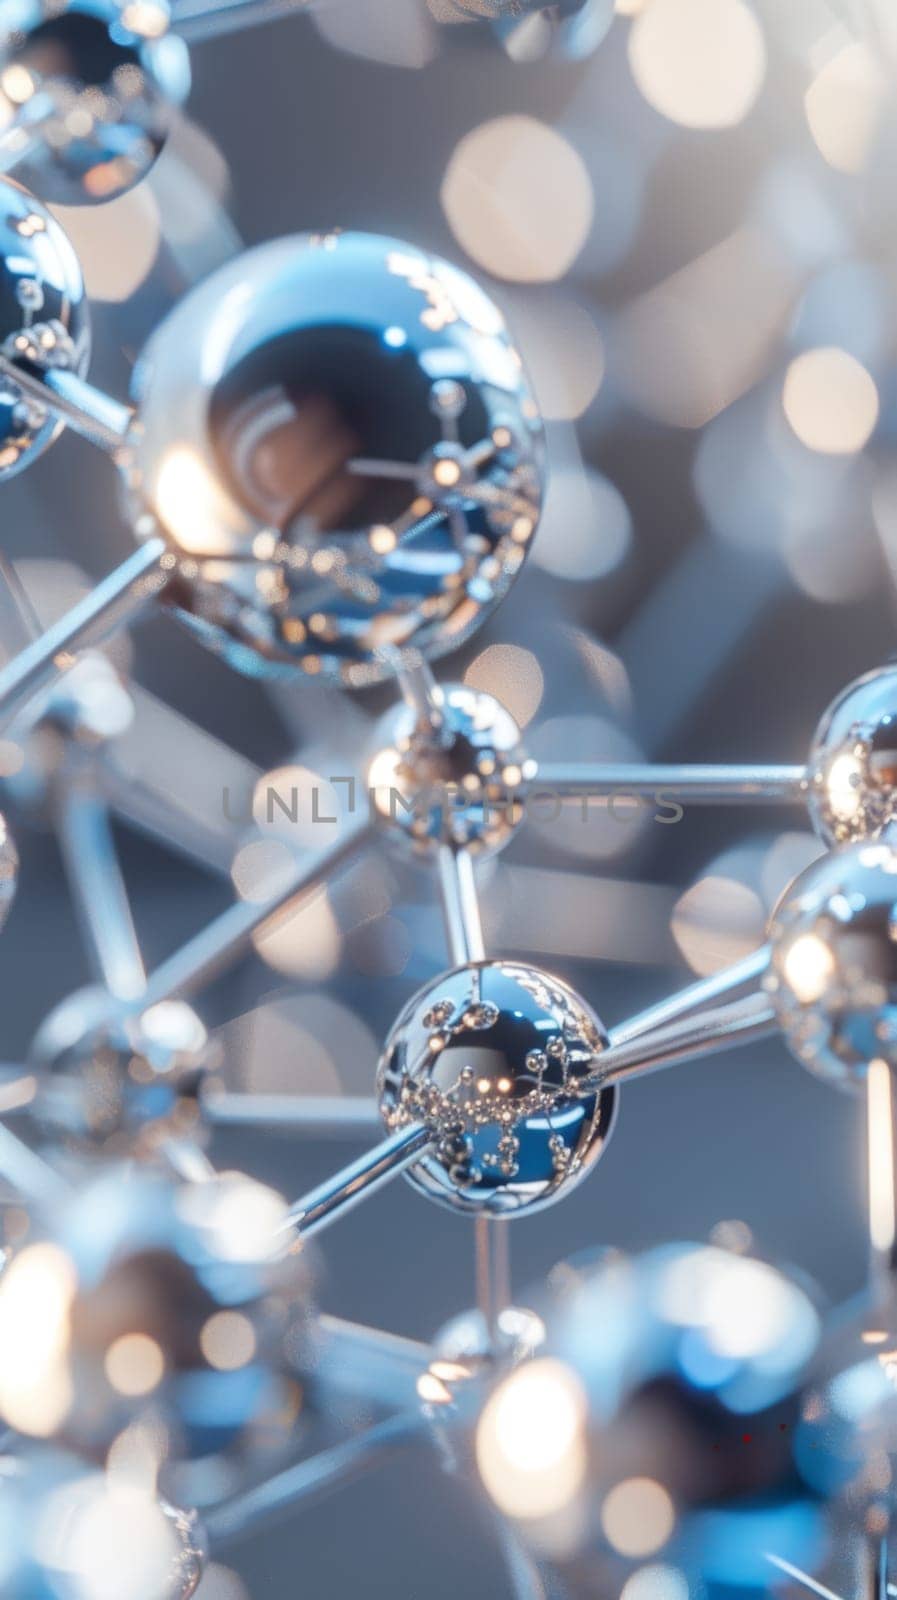 Softly illuminated crystalline molecular structures with reflective surfaces offer a visually striking image with a shallow depth of field. by sfinks